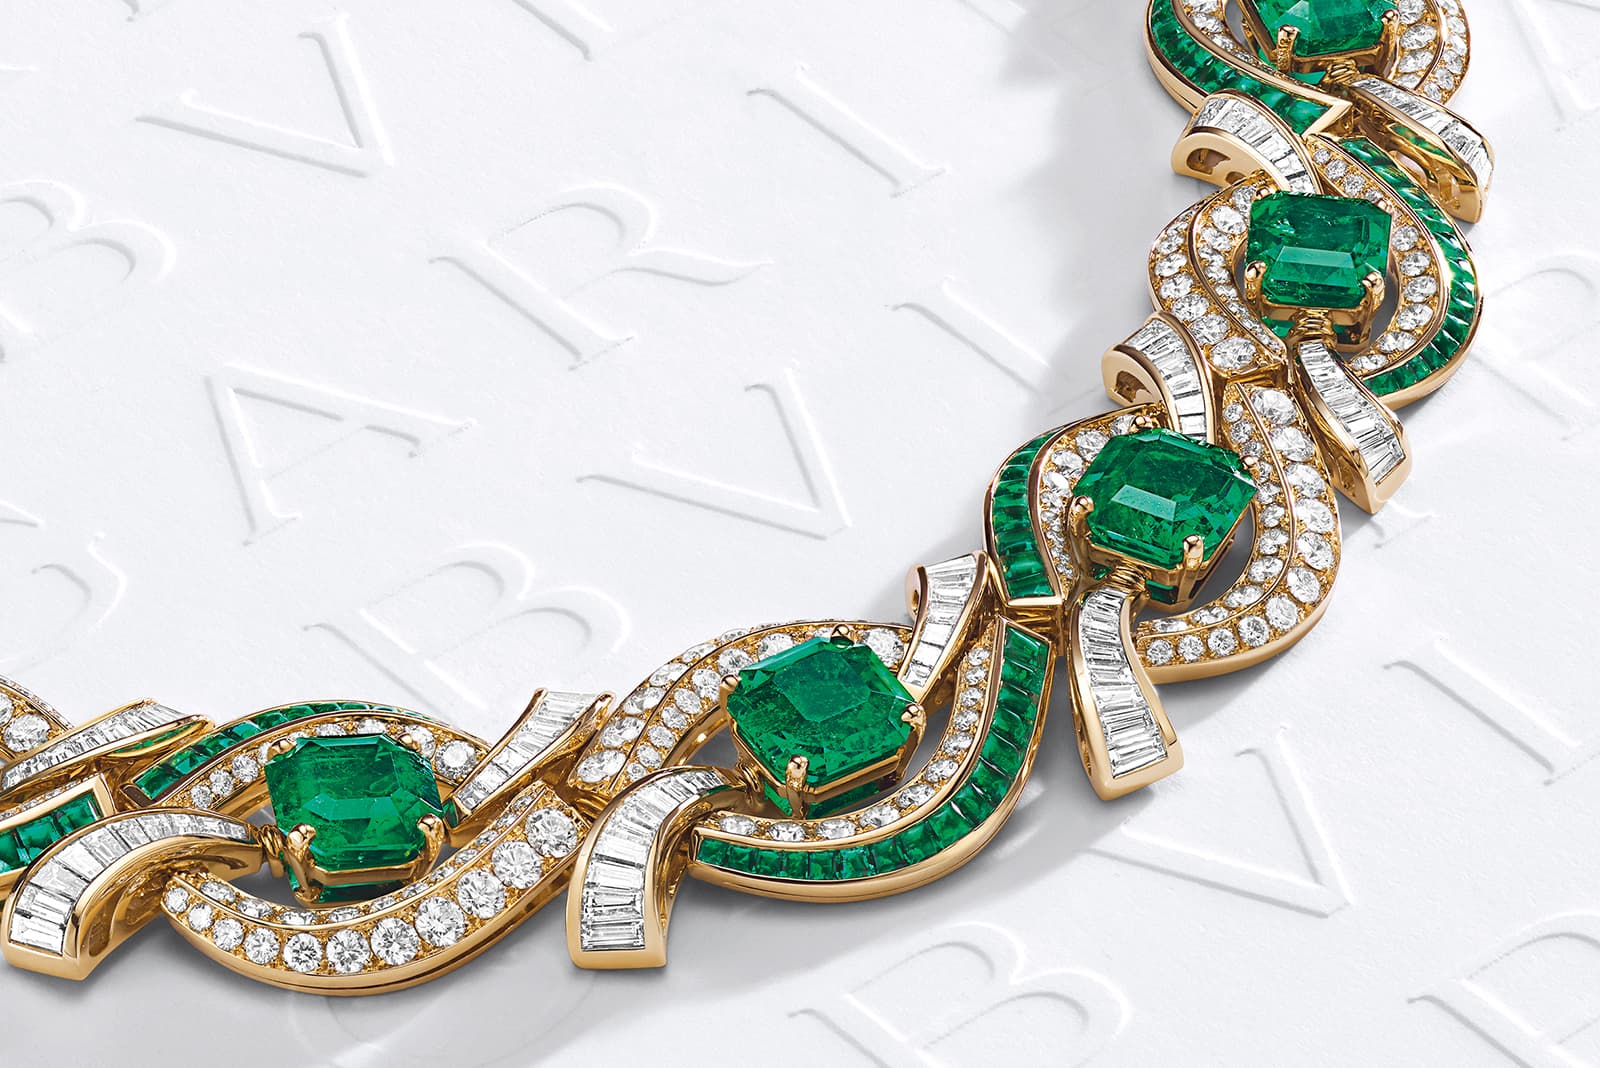 BVLGARI 🐍 It's History, Iconic Jewelry and WHY It's So Expensive 